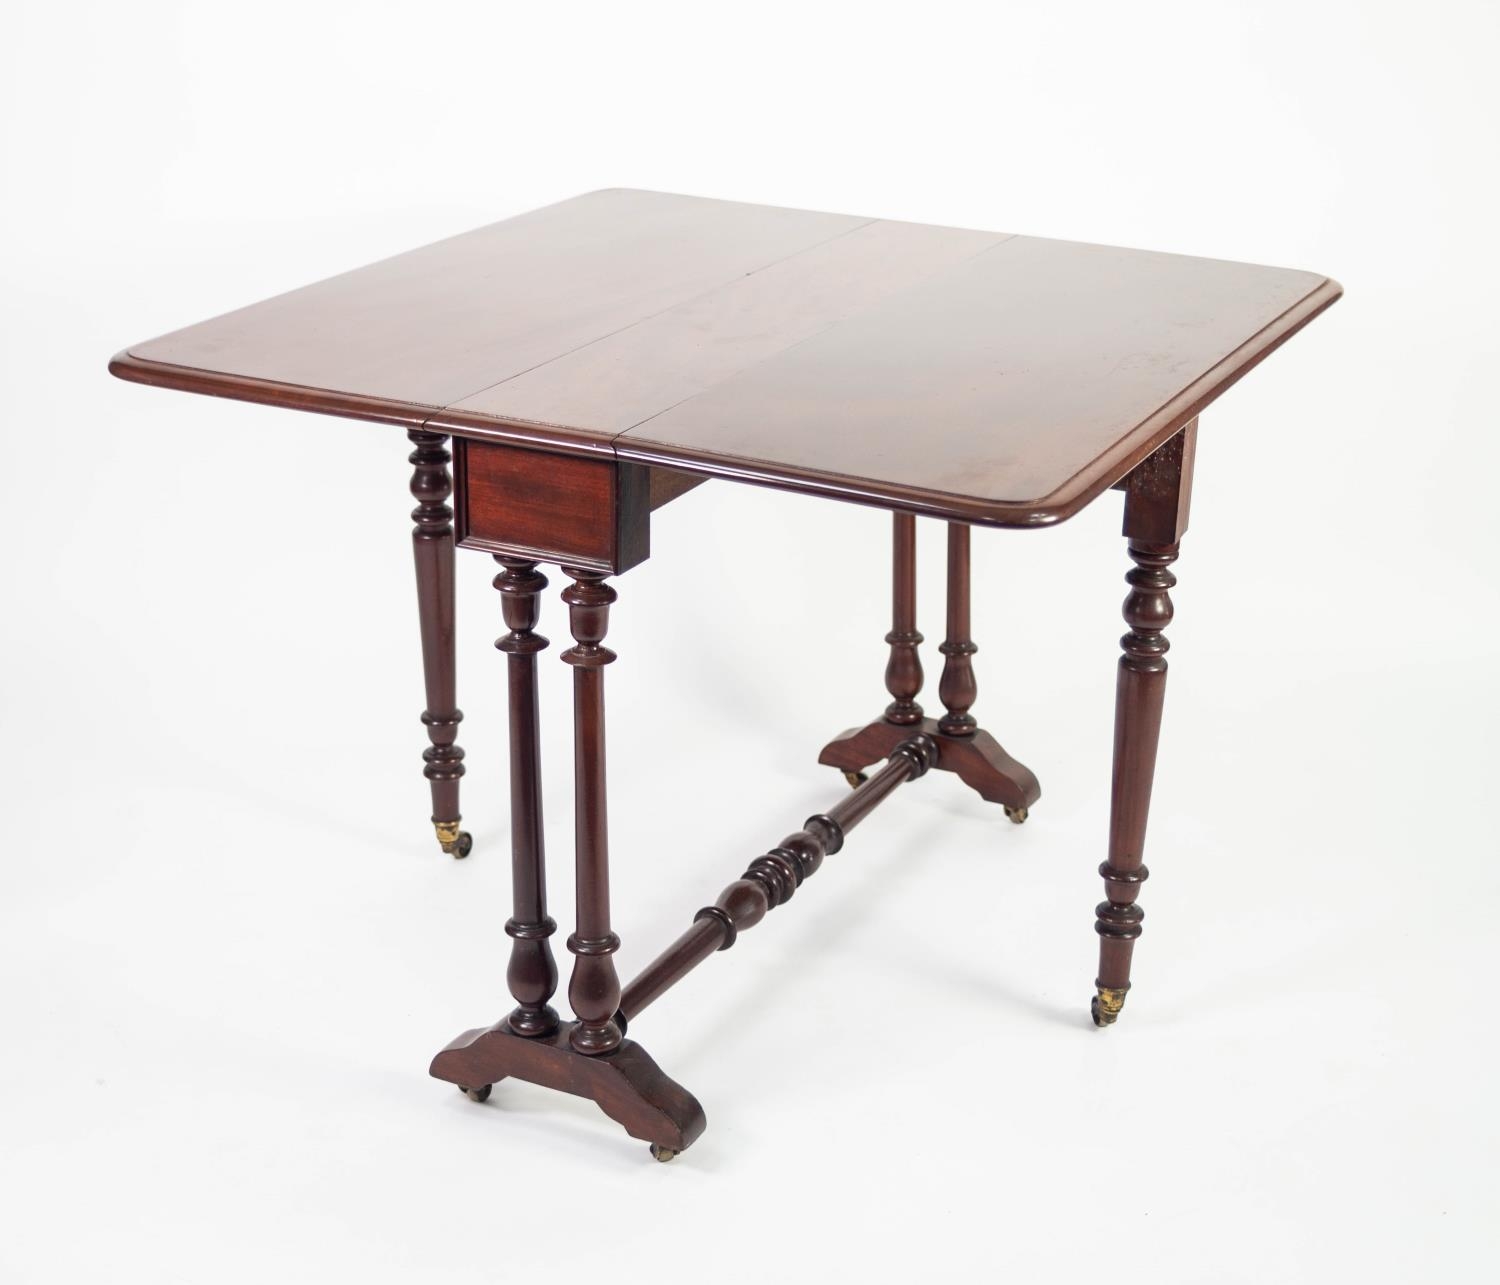 VICTORIAN MAHOGANY SUTHERLAND TABLE, with moulded, rounded oblong drop leaves and double turned - Image 2 of 2